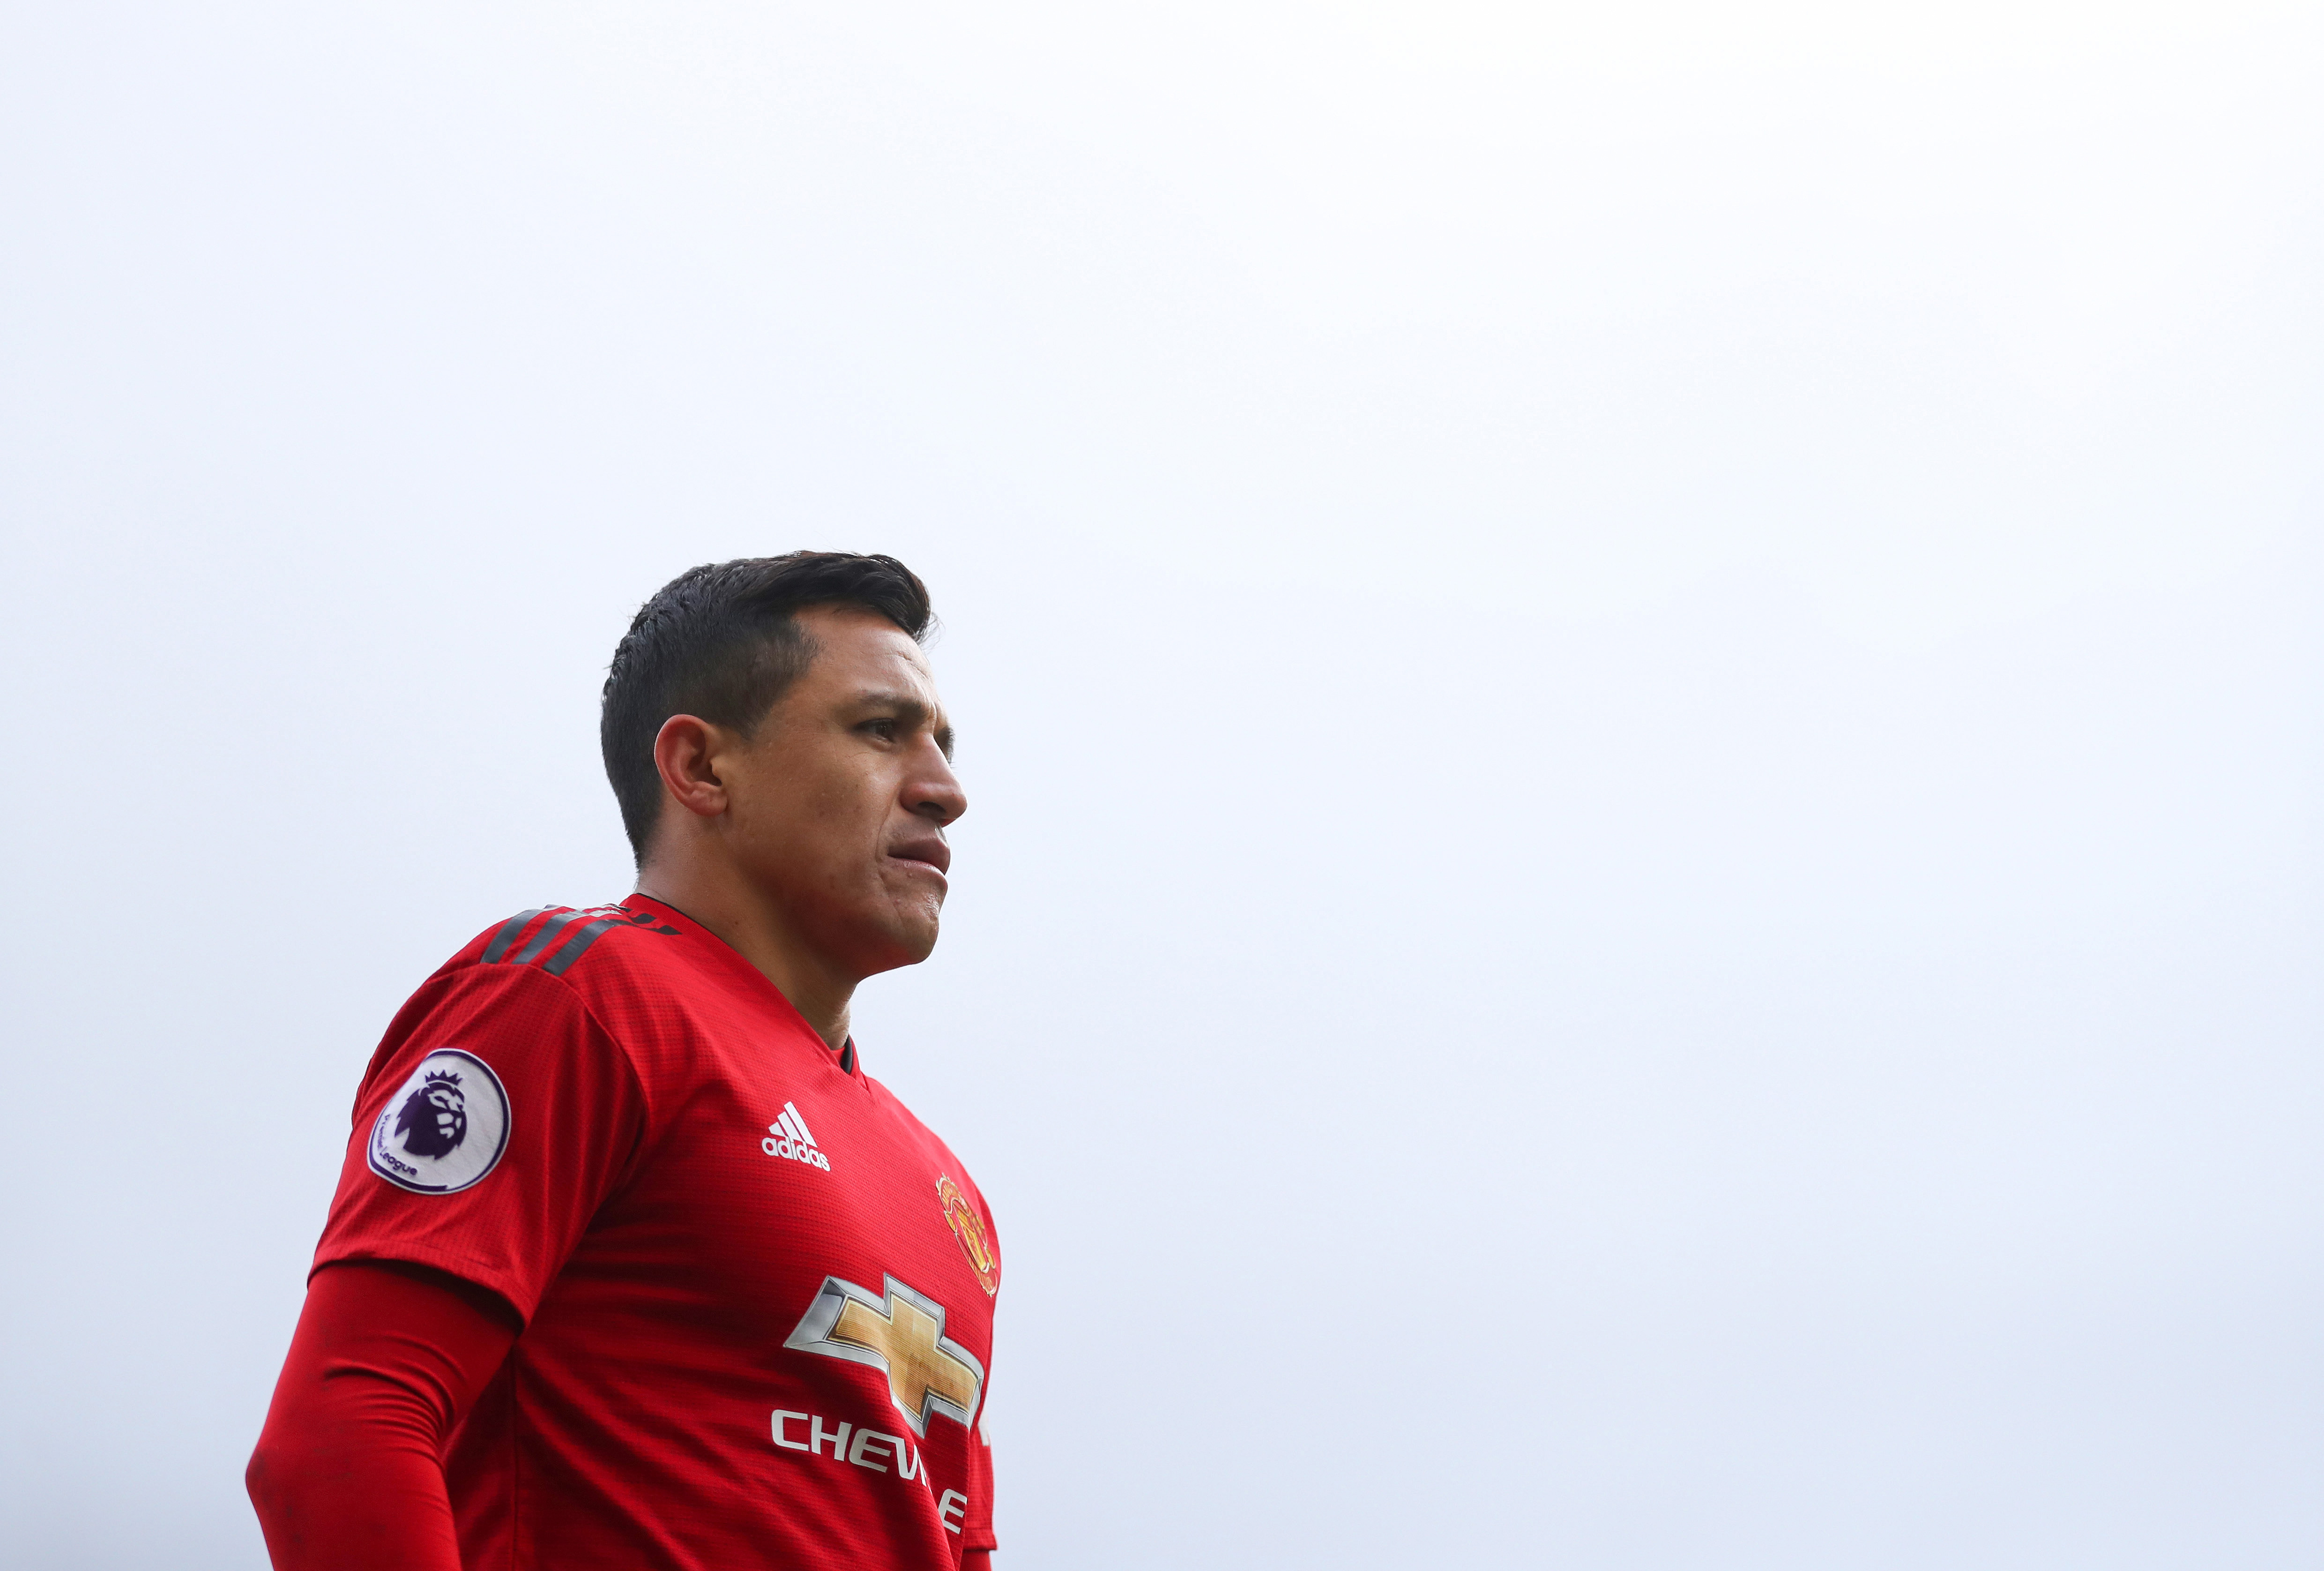 LONDON, ENGLAND - FEBRUARY 09:  Alexis Sanchez of Manchester United during the Premier League match between Fulham FC and Manchester United at Craven Cottage on February 09, 2019 in London, United Kingdom. (Photo by Catherine Ivill/Getty Images)